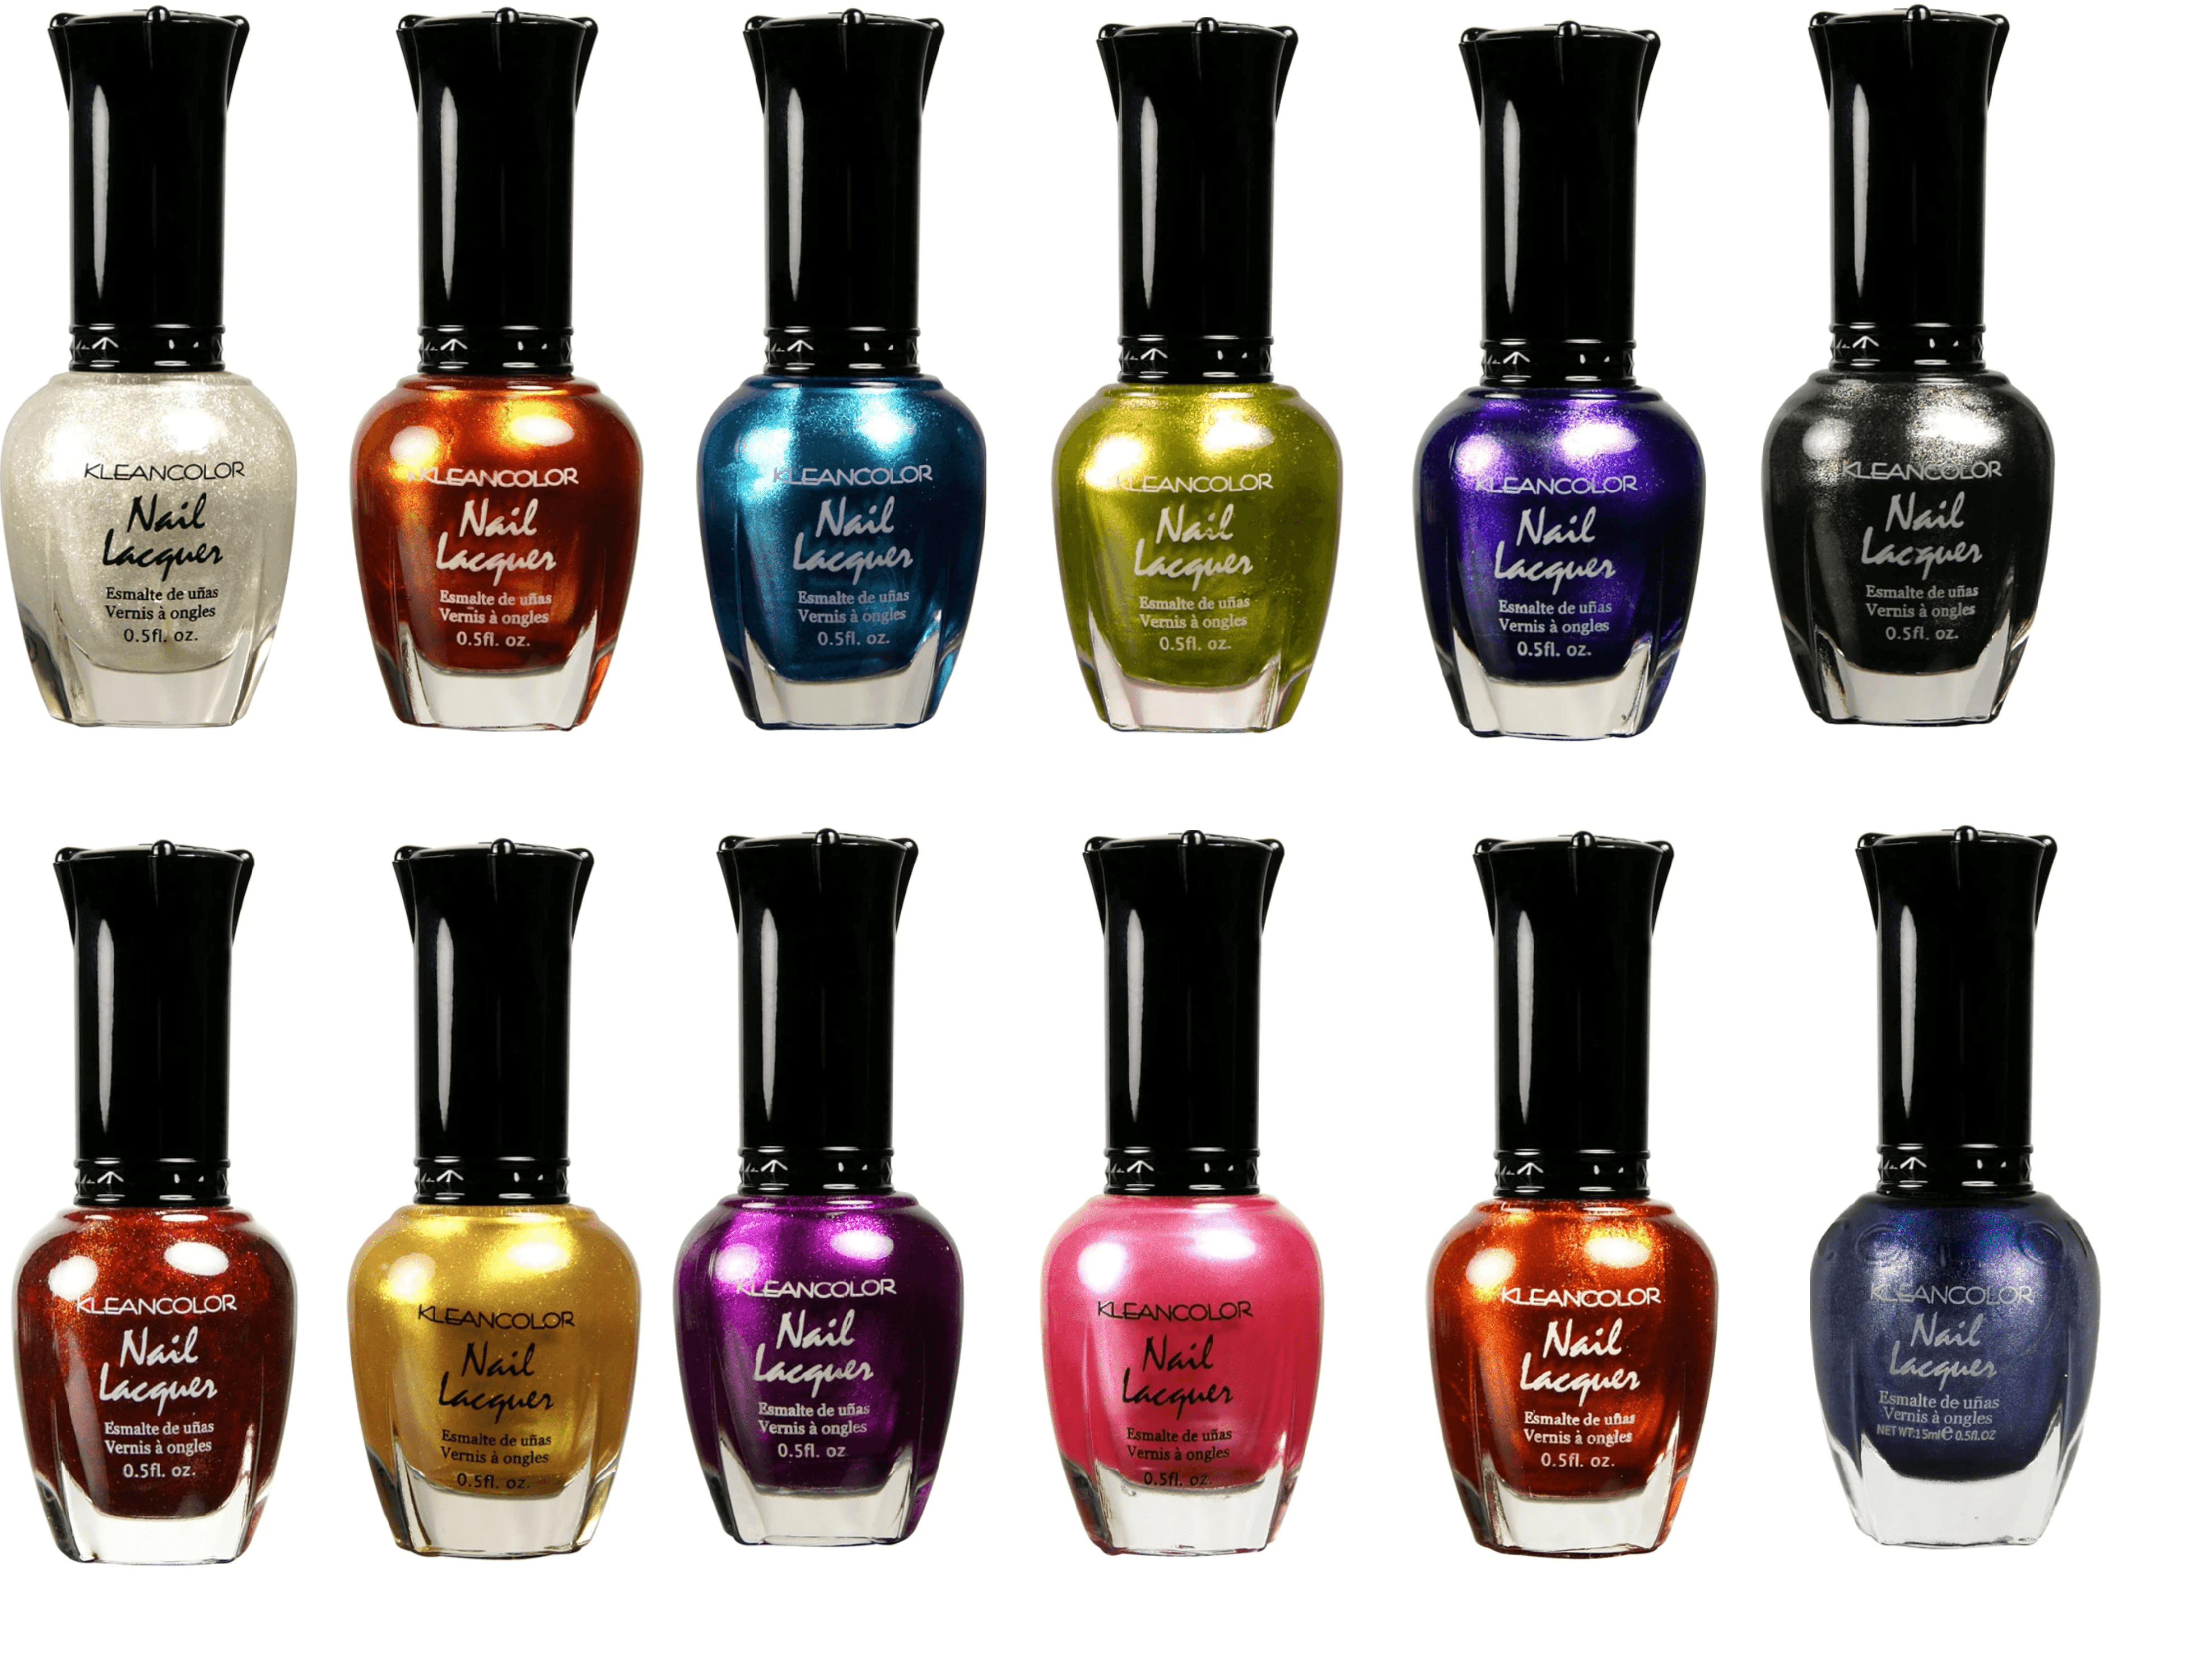 1. "Best Nail Polish Colors for Women Over 60" - wide 7